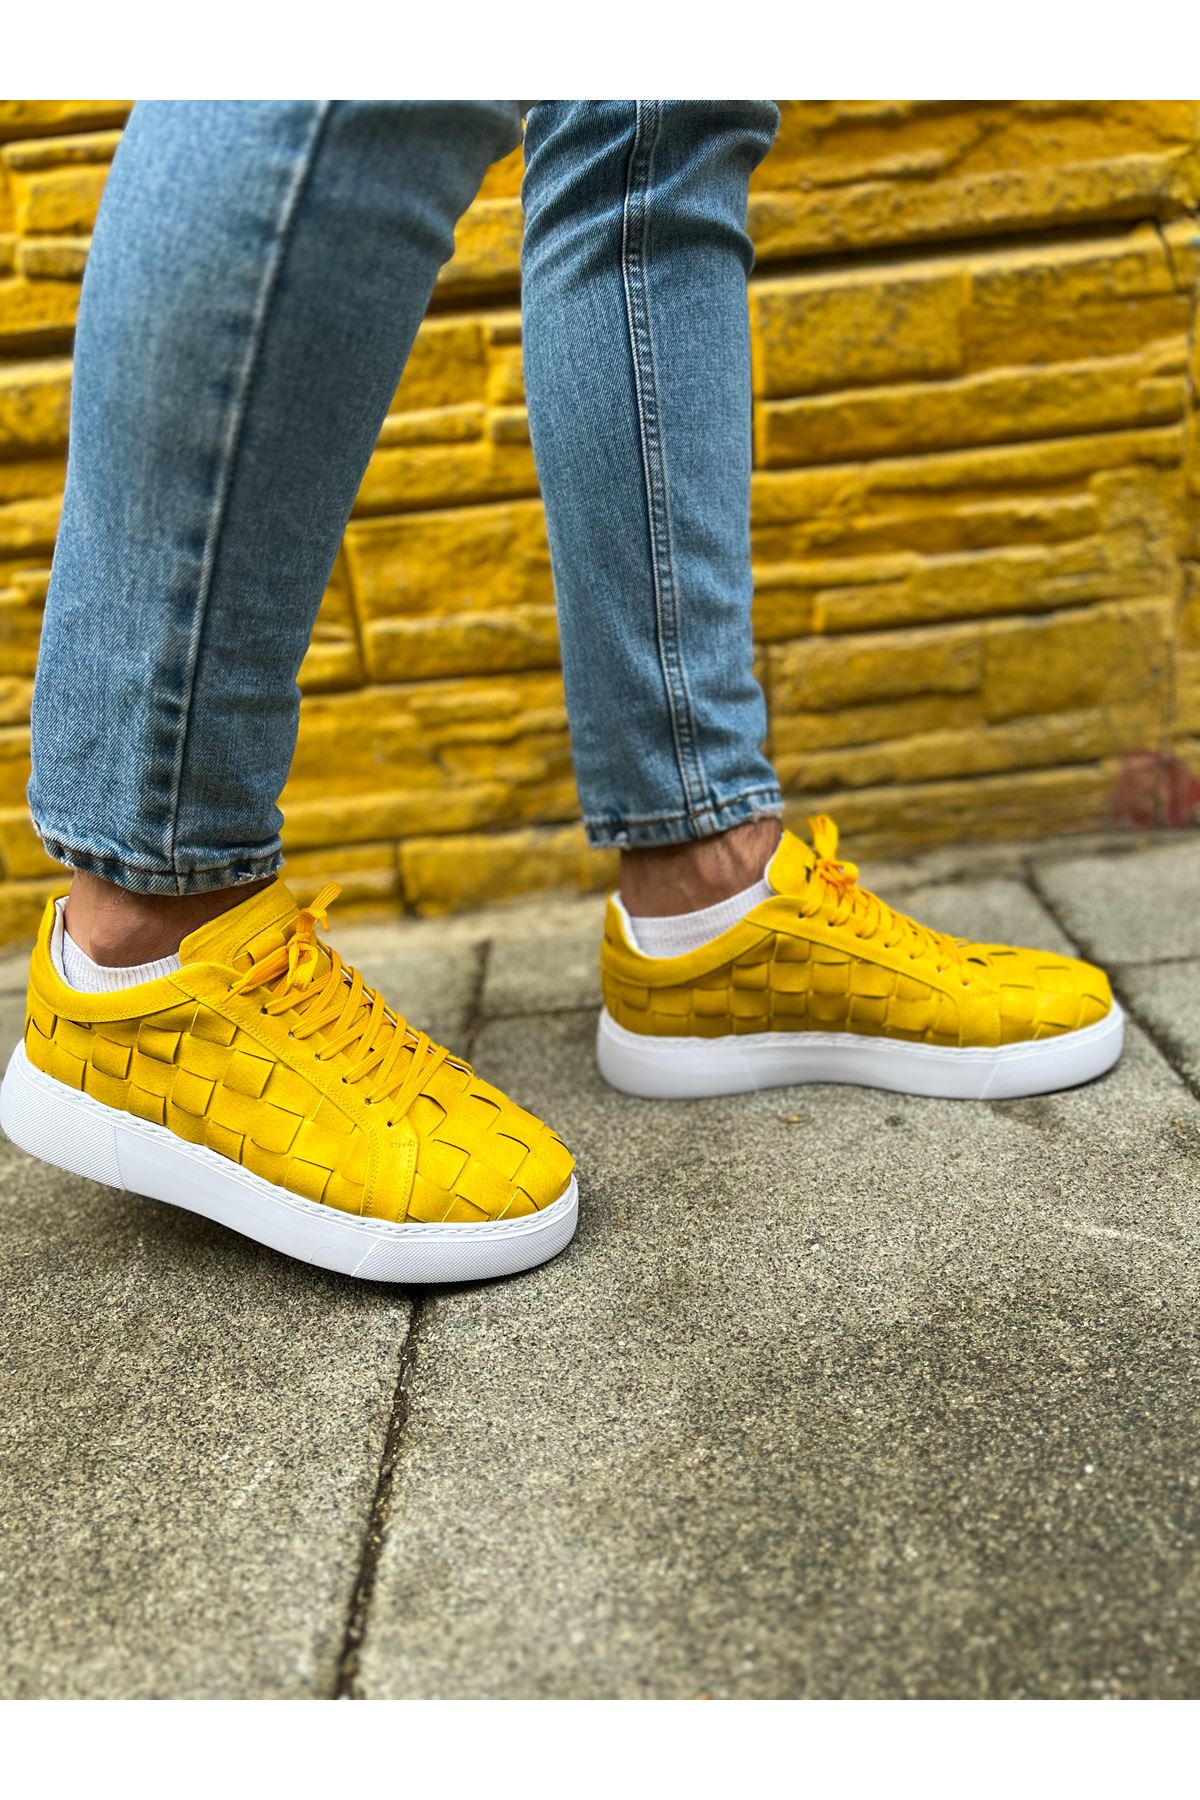 CH209 OBT Vimini Men's Shoes sneakers YELLOW - STREETMODE ™